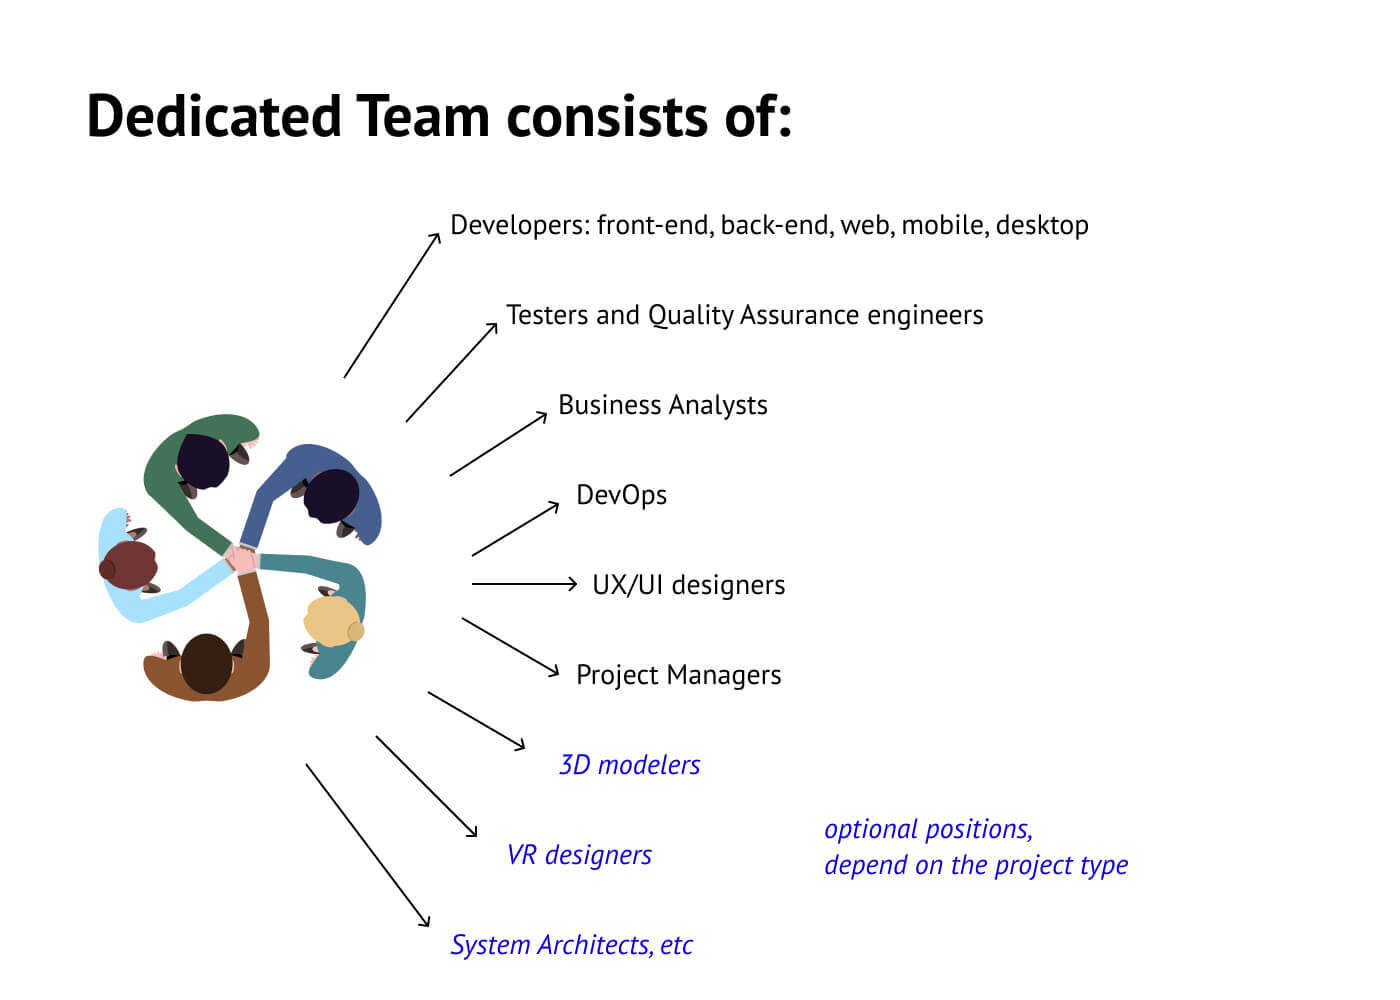 pic 1 - How to Hire a Dedicated Development Team: A Complete Guide for Businesses for 2022